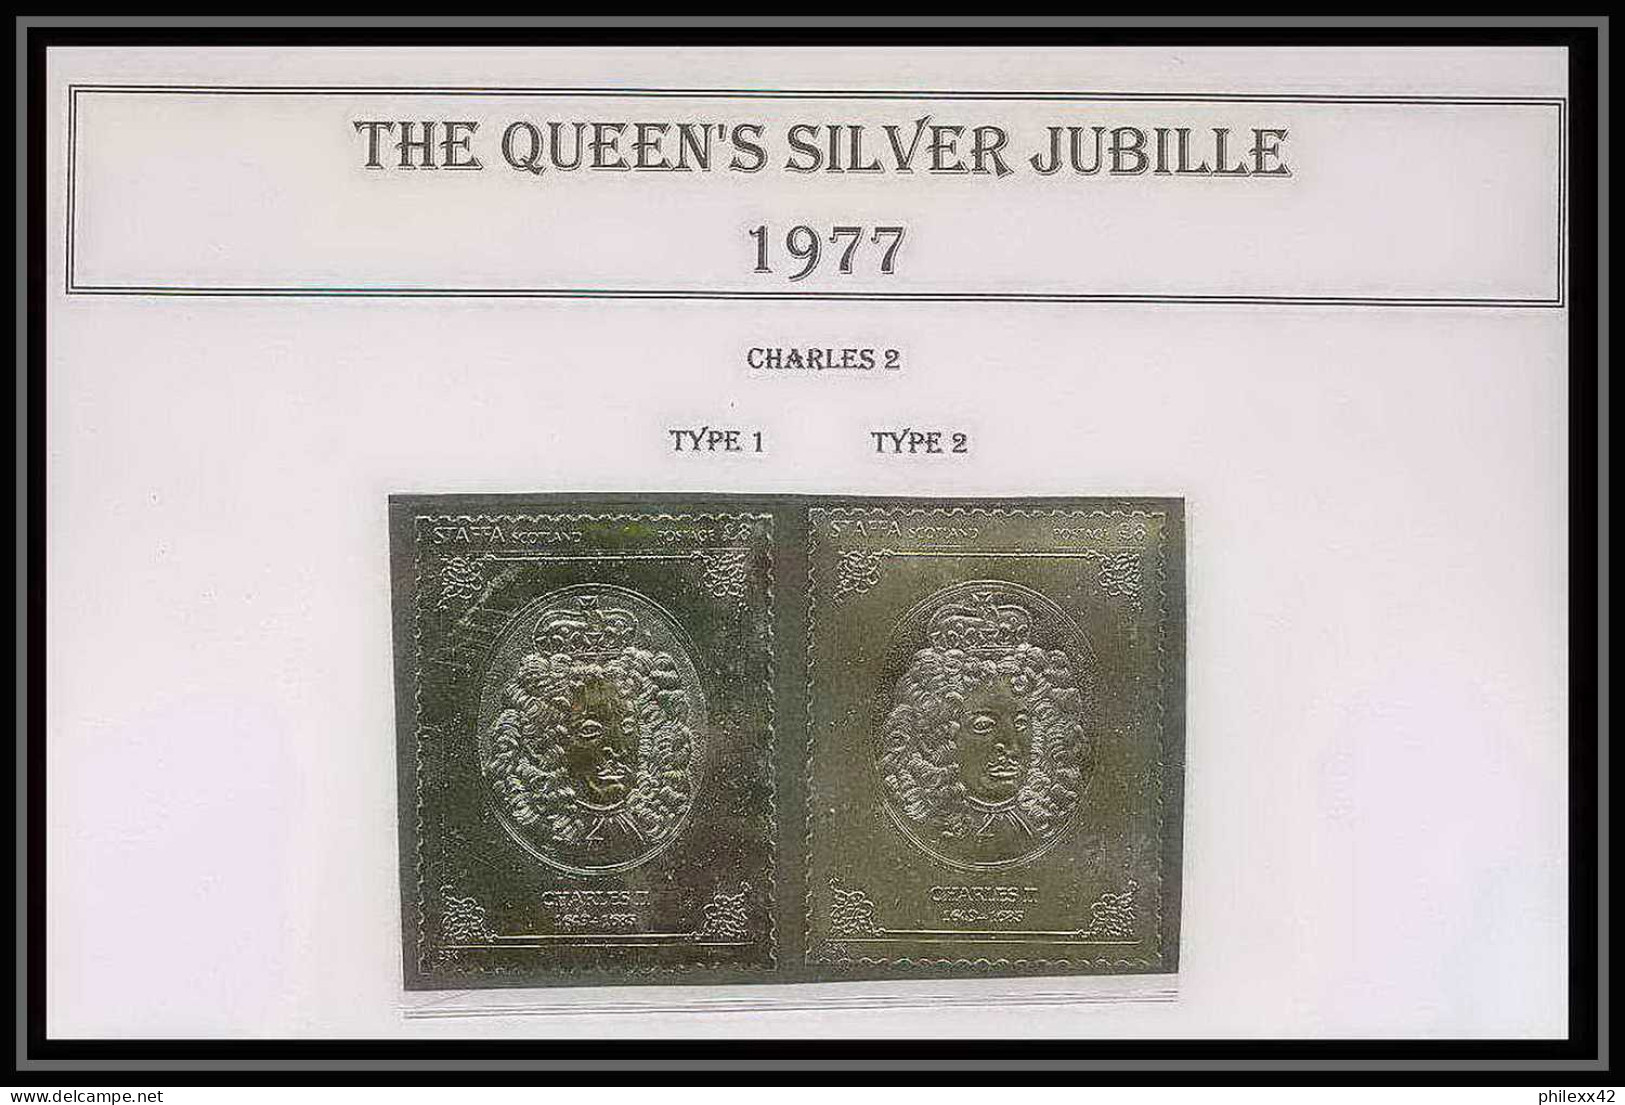 446a Staffa Scotland The Queen's Silver Jubilee 1977 OR Gold Stamps Monarchy United Kingdom Charles 2 Type 1&2 ** - Local Issues